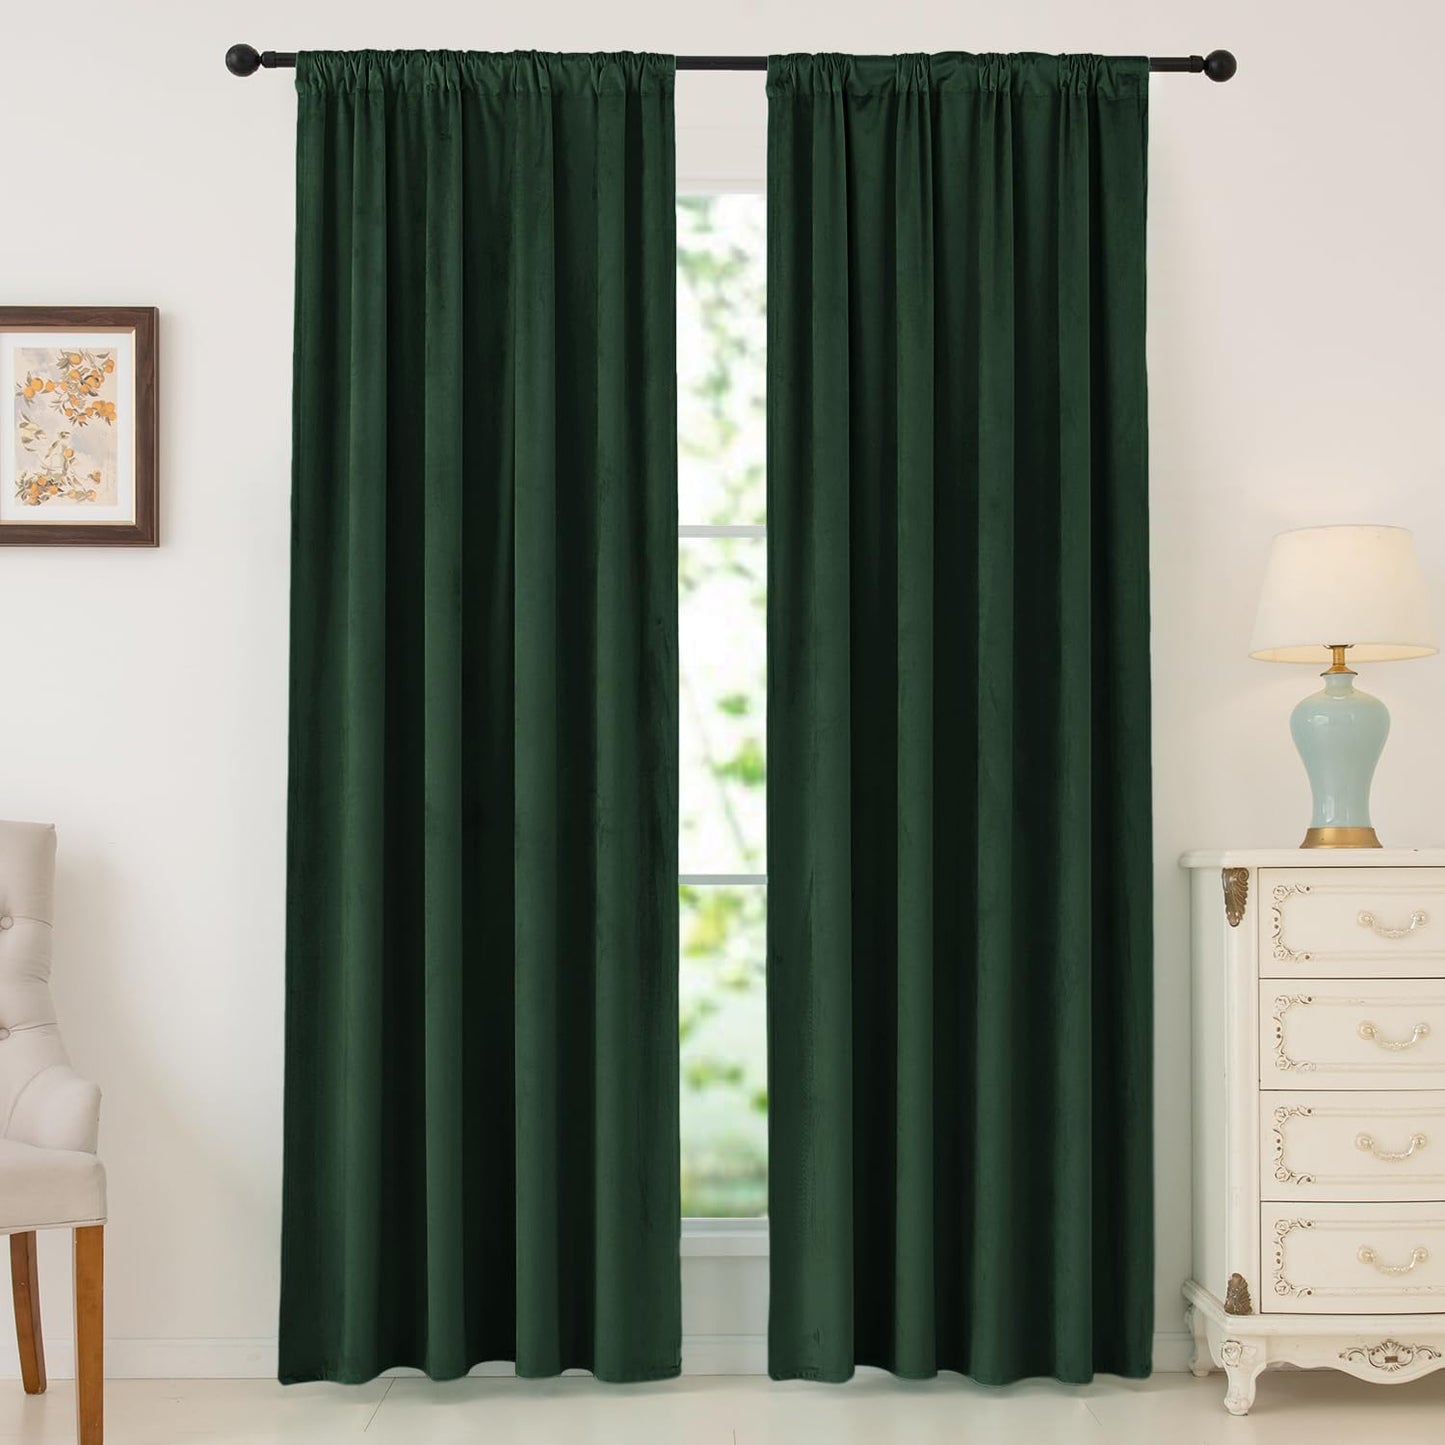 Nanbowang Green Velvet Curtains 63 Inches Long Dark Green Light Blocking Rod Pocket Window Curtain Panels Set of 2 Heat Insulated Curtains Thermal Curtain Panels for Bedroom  nanbowang Dark Green 52"X72" 